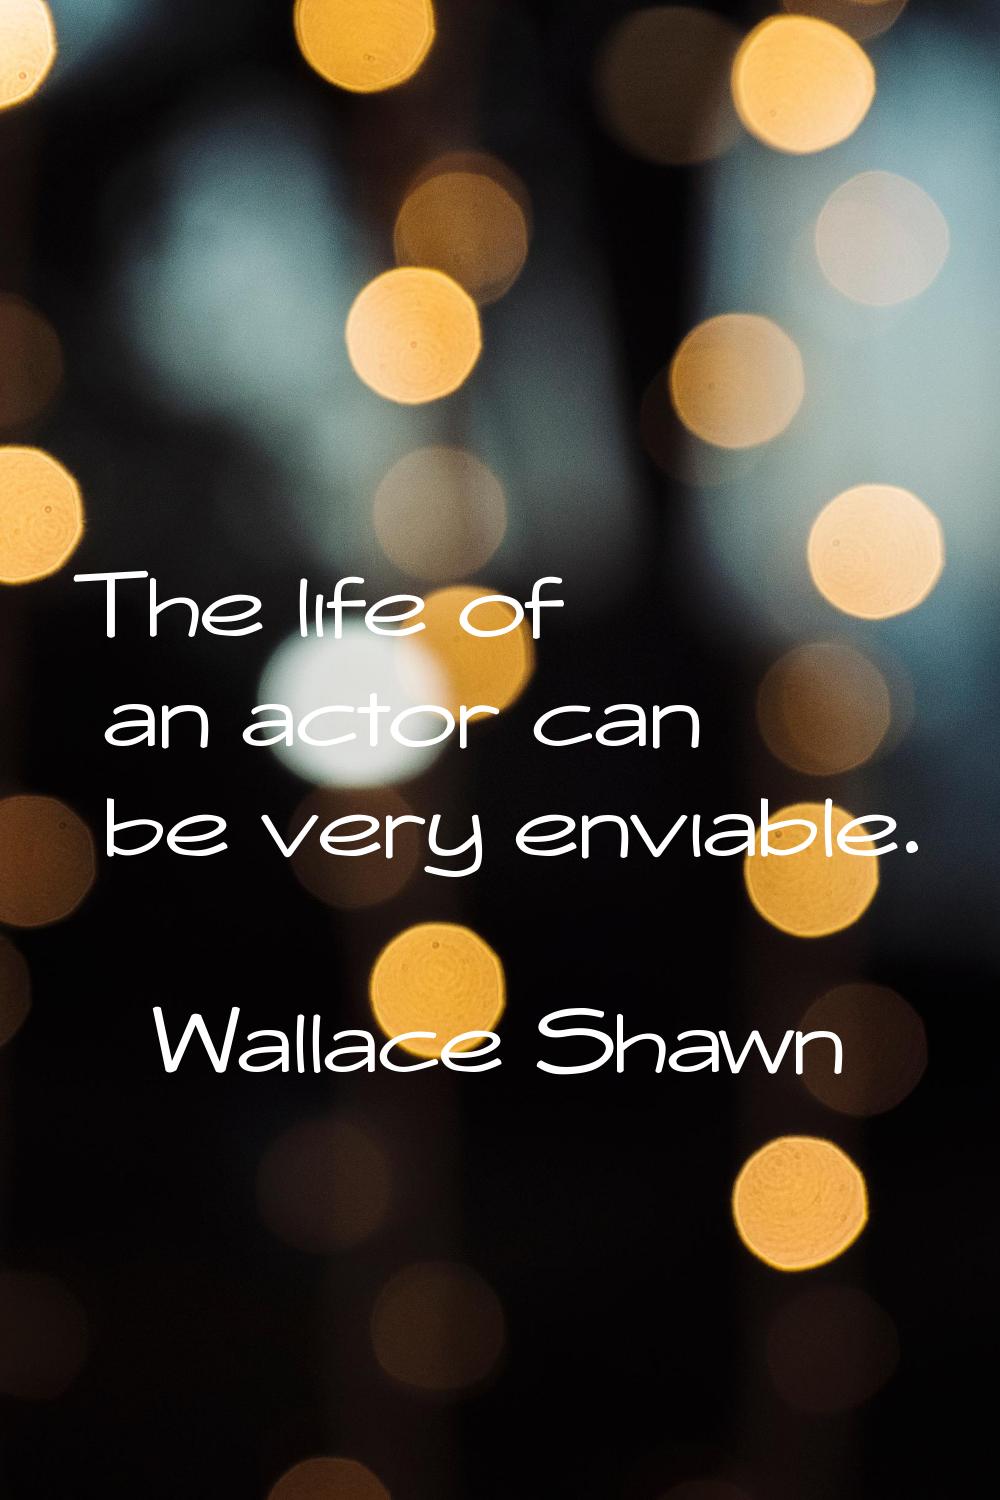 The life of an actor can be very enviable.